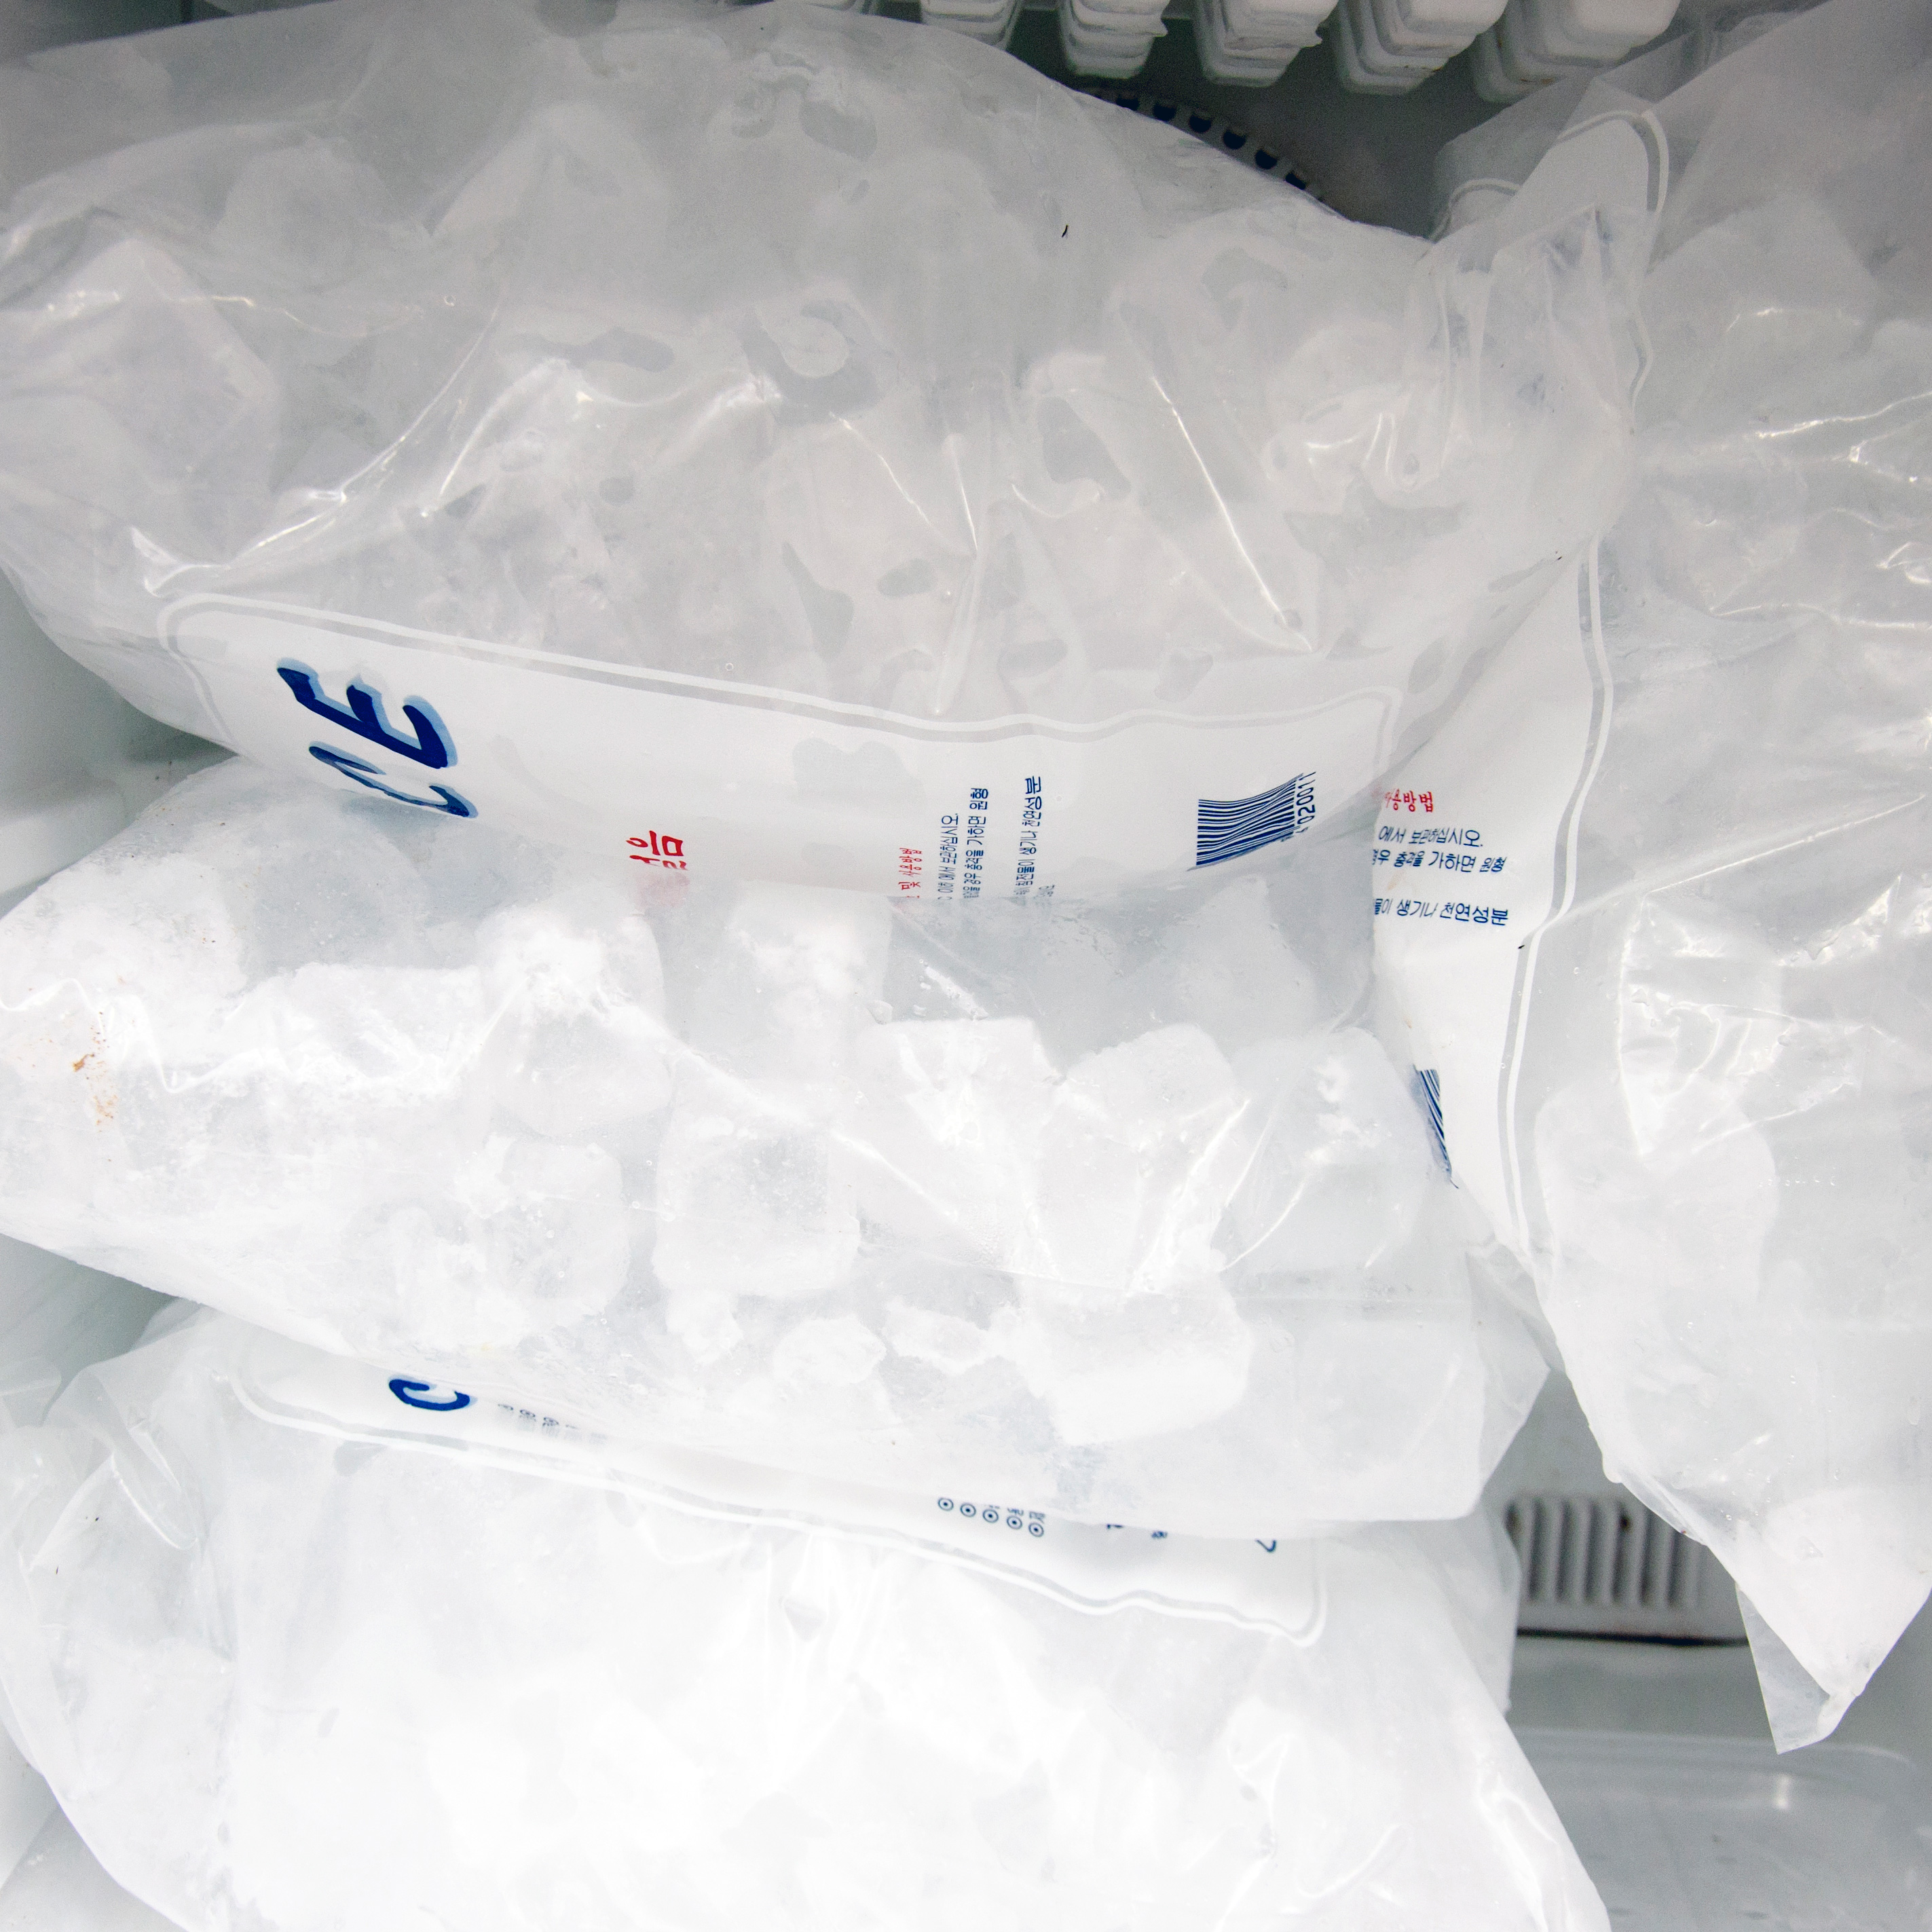 Bags of ice in a freezer.